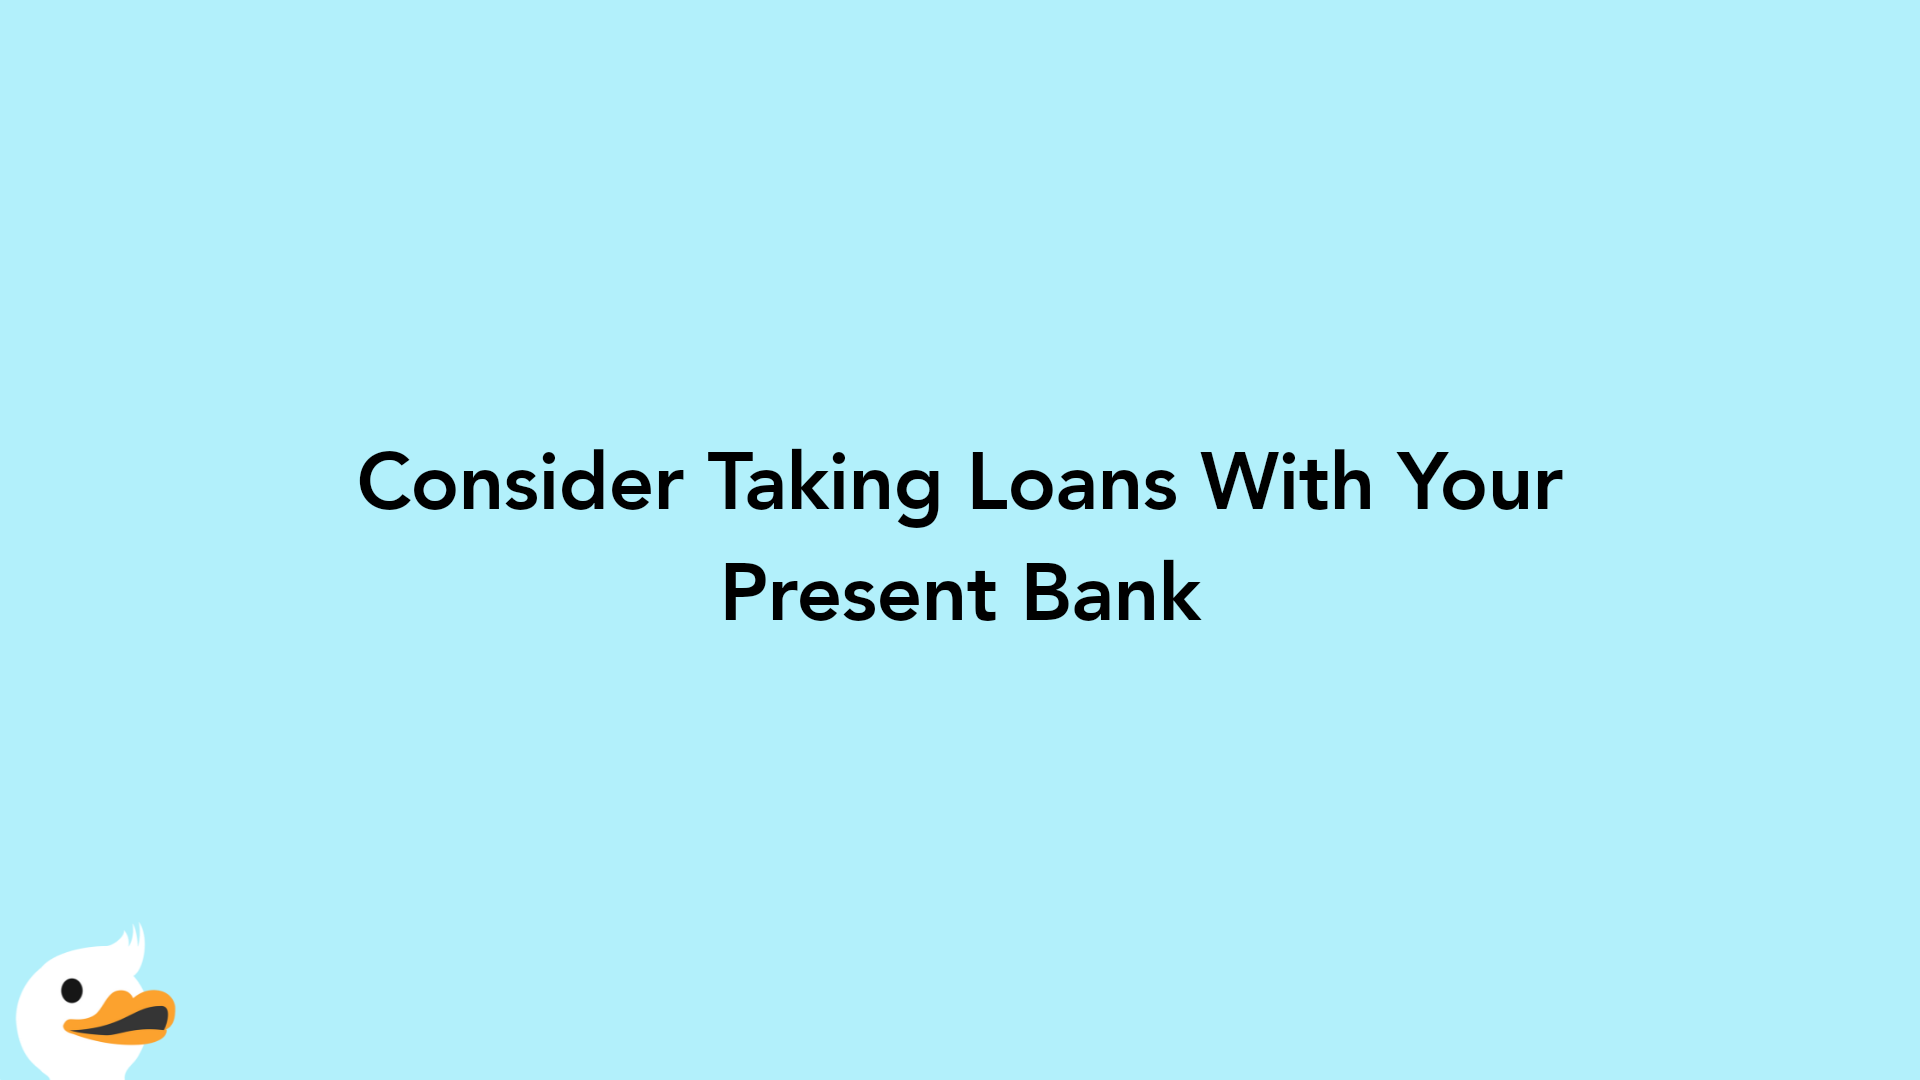 Consider Taking Loans With Your Present Bank